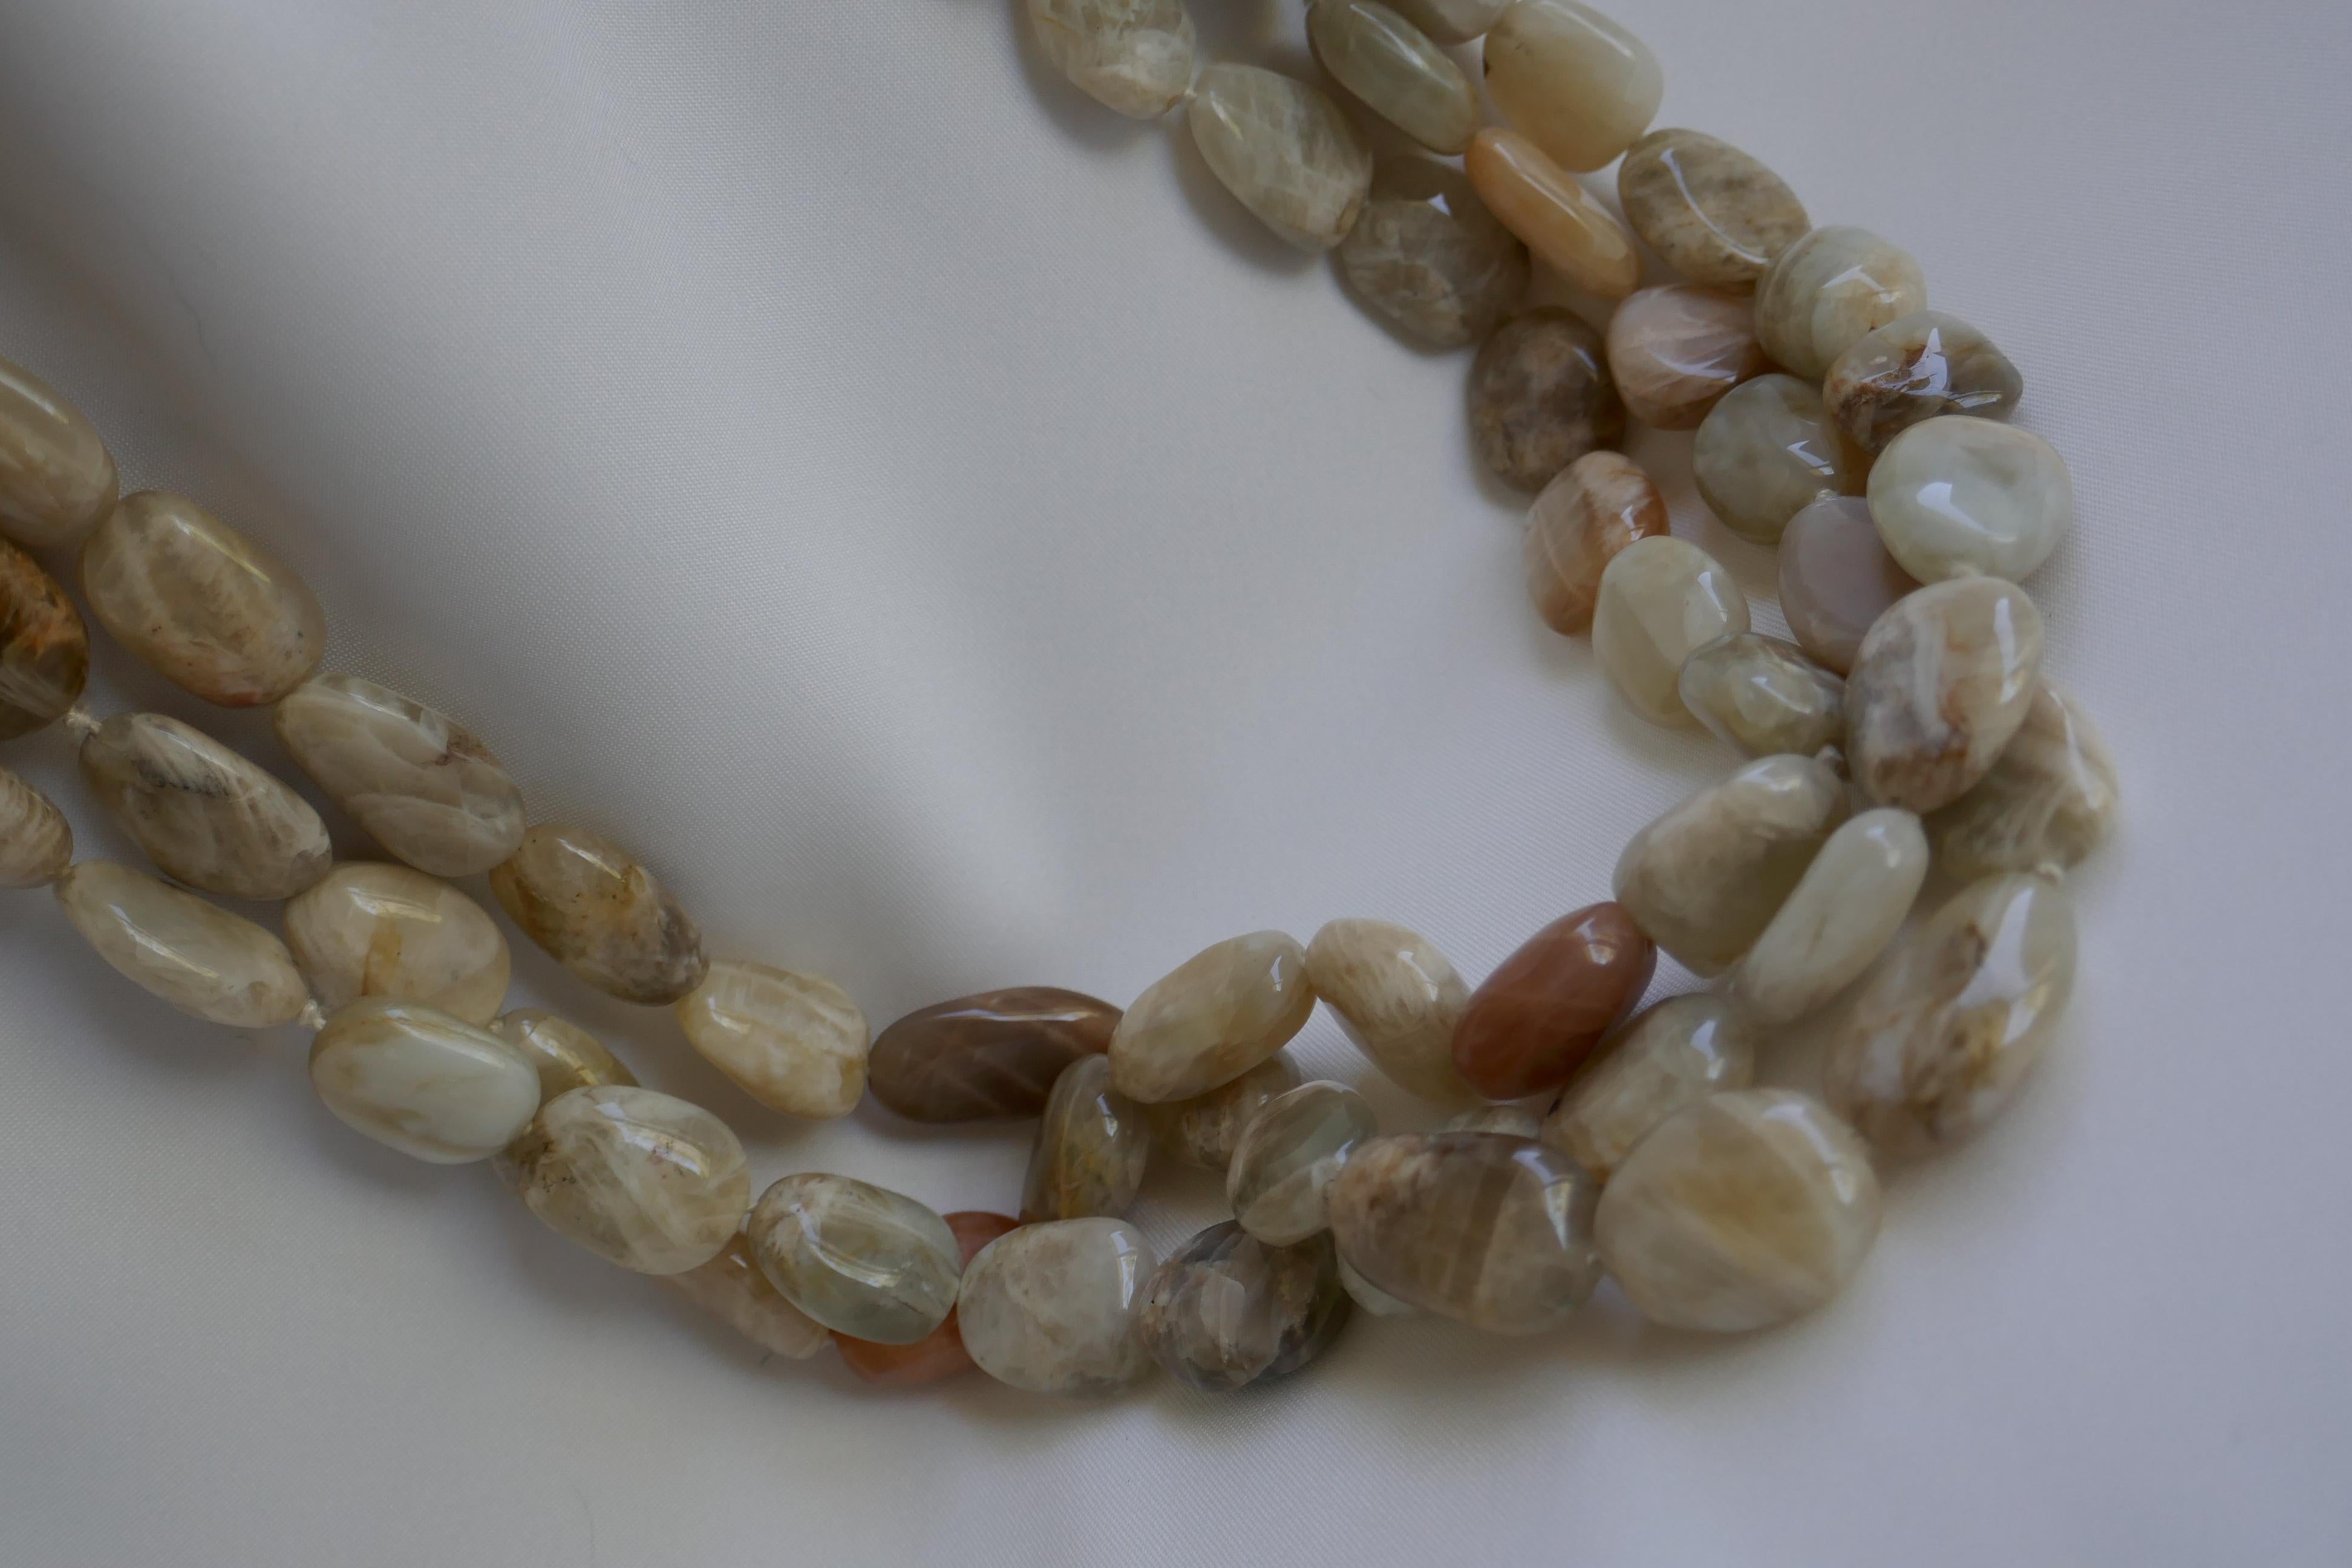 Love moonstones!!! This a stunning statement necklace. This three strand nugget moonstone necklace has beautiful stones the nuggets are in a pale peach, off white and beige tones.The tones of this moonstone necklace are beautiful. The size of the